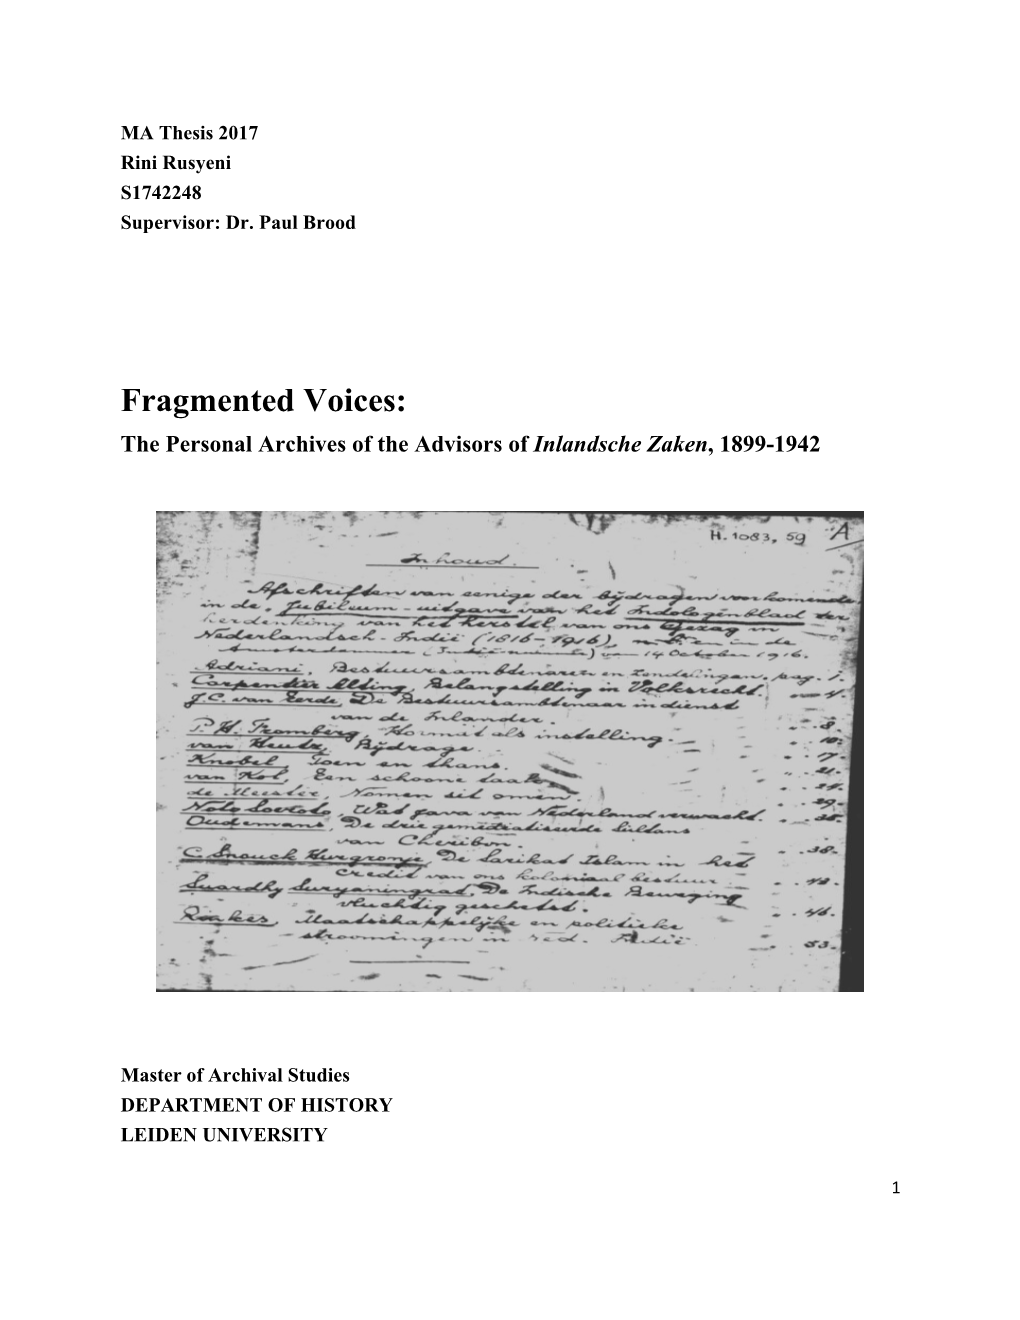 Fragmented Voices: the Personal Archives of the Advisors of Inlandsche Zaken, 1899-1942